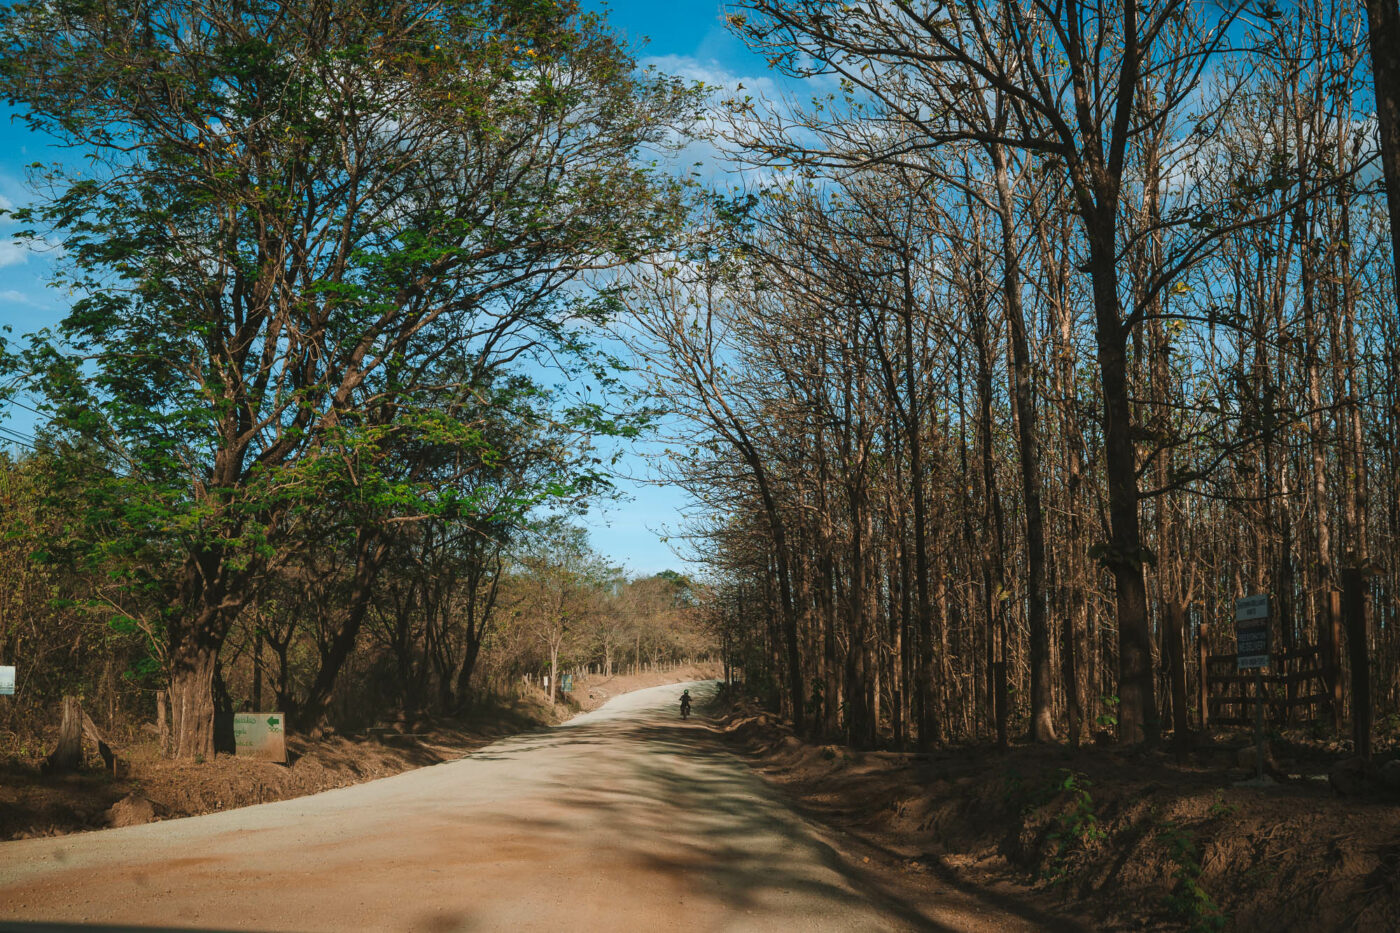 A dirt road is common in Guanacaste, Costa Rica